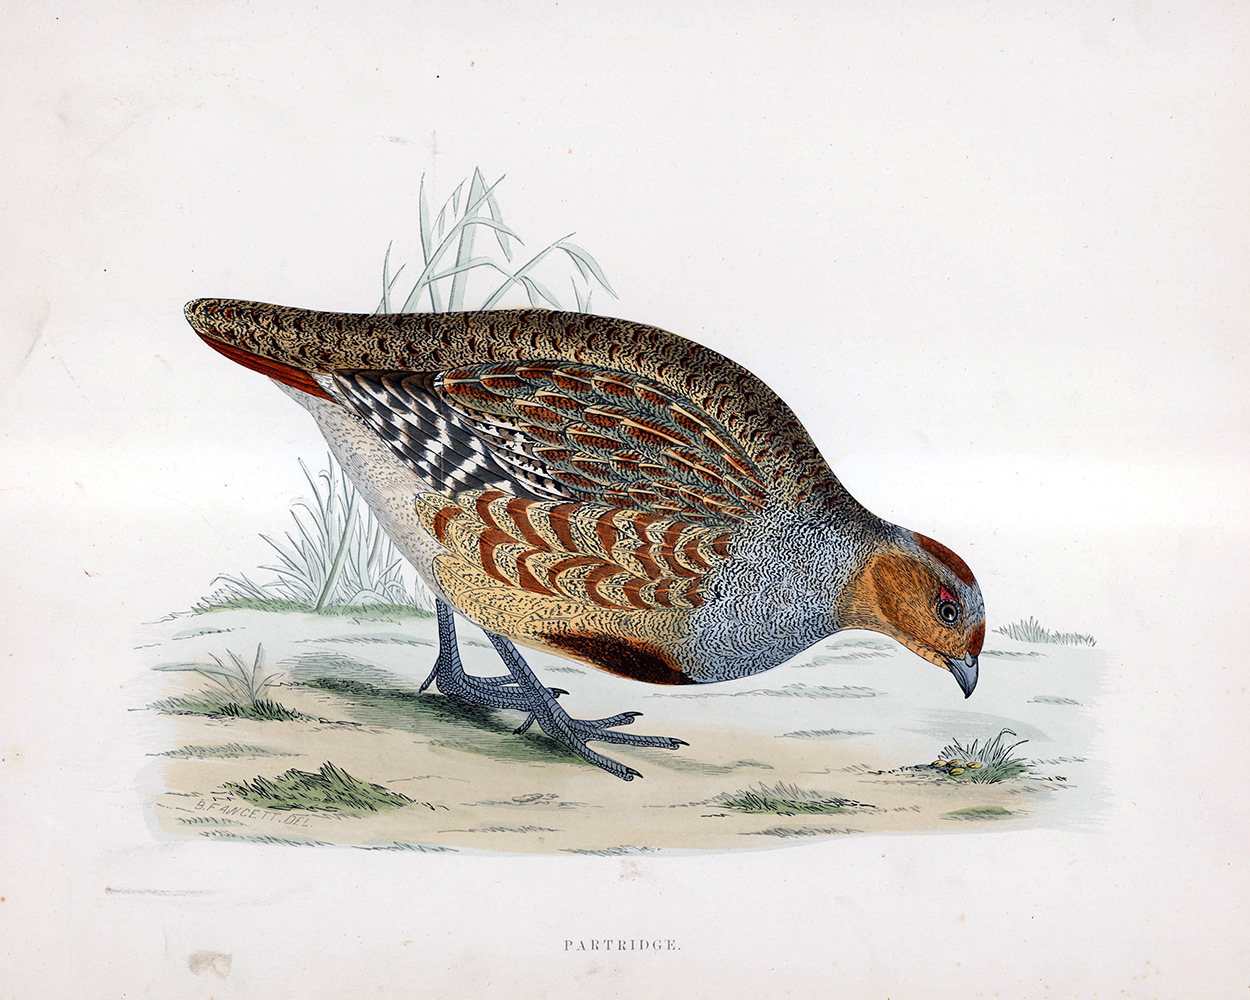 Partridge - hand coloured lithograph 1891 (Print) art by Beverley R Morris at The Illustration Art Gallery